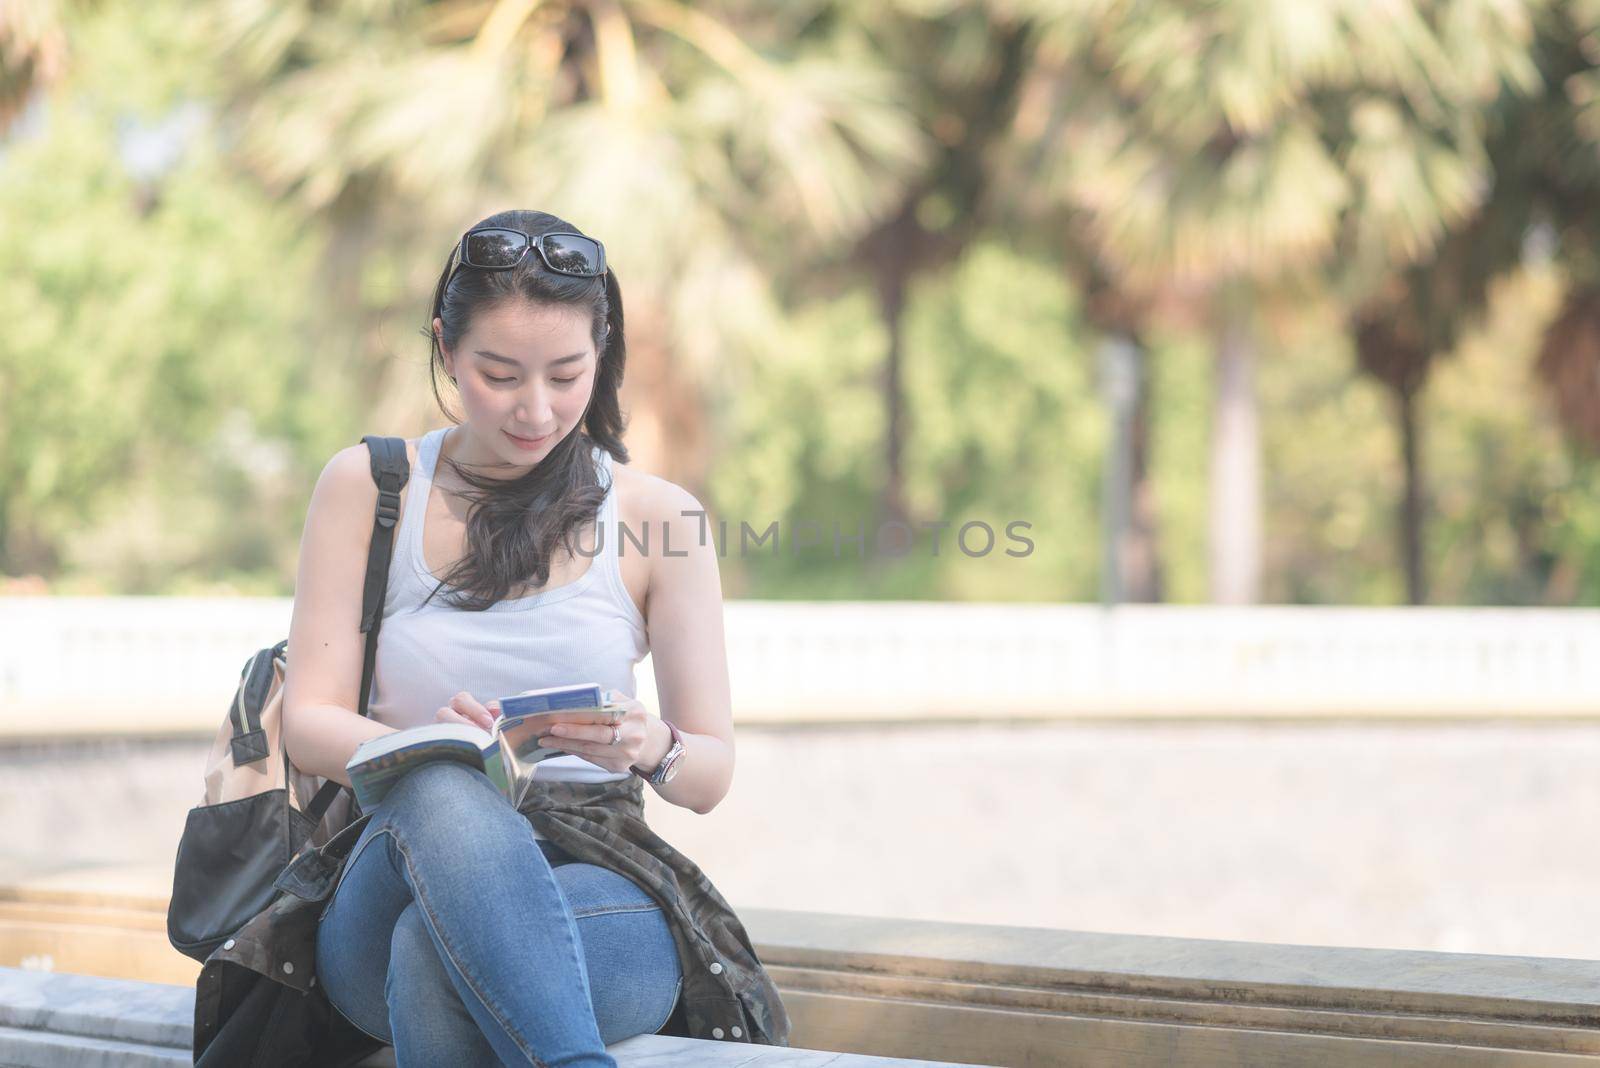 Beautiful asian tourist woman reading the travel guide book searching for for tourists sightseeing spot. Vacation travel in summer.